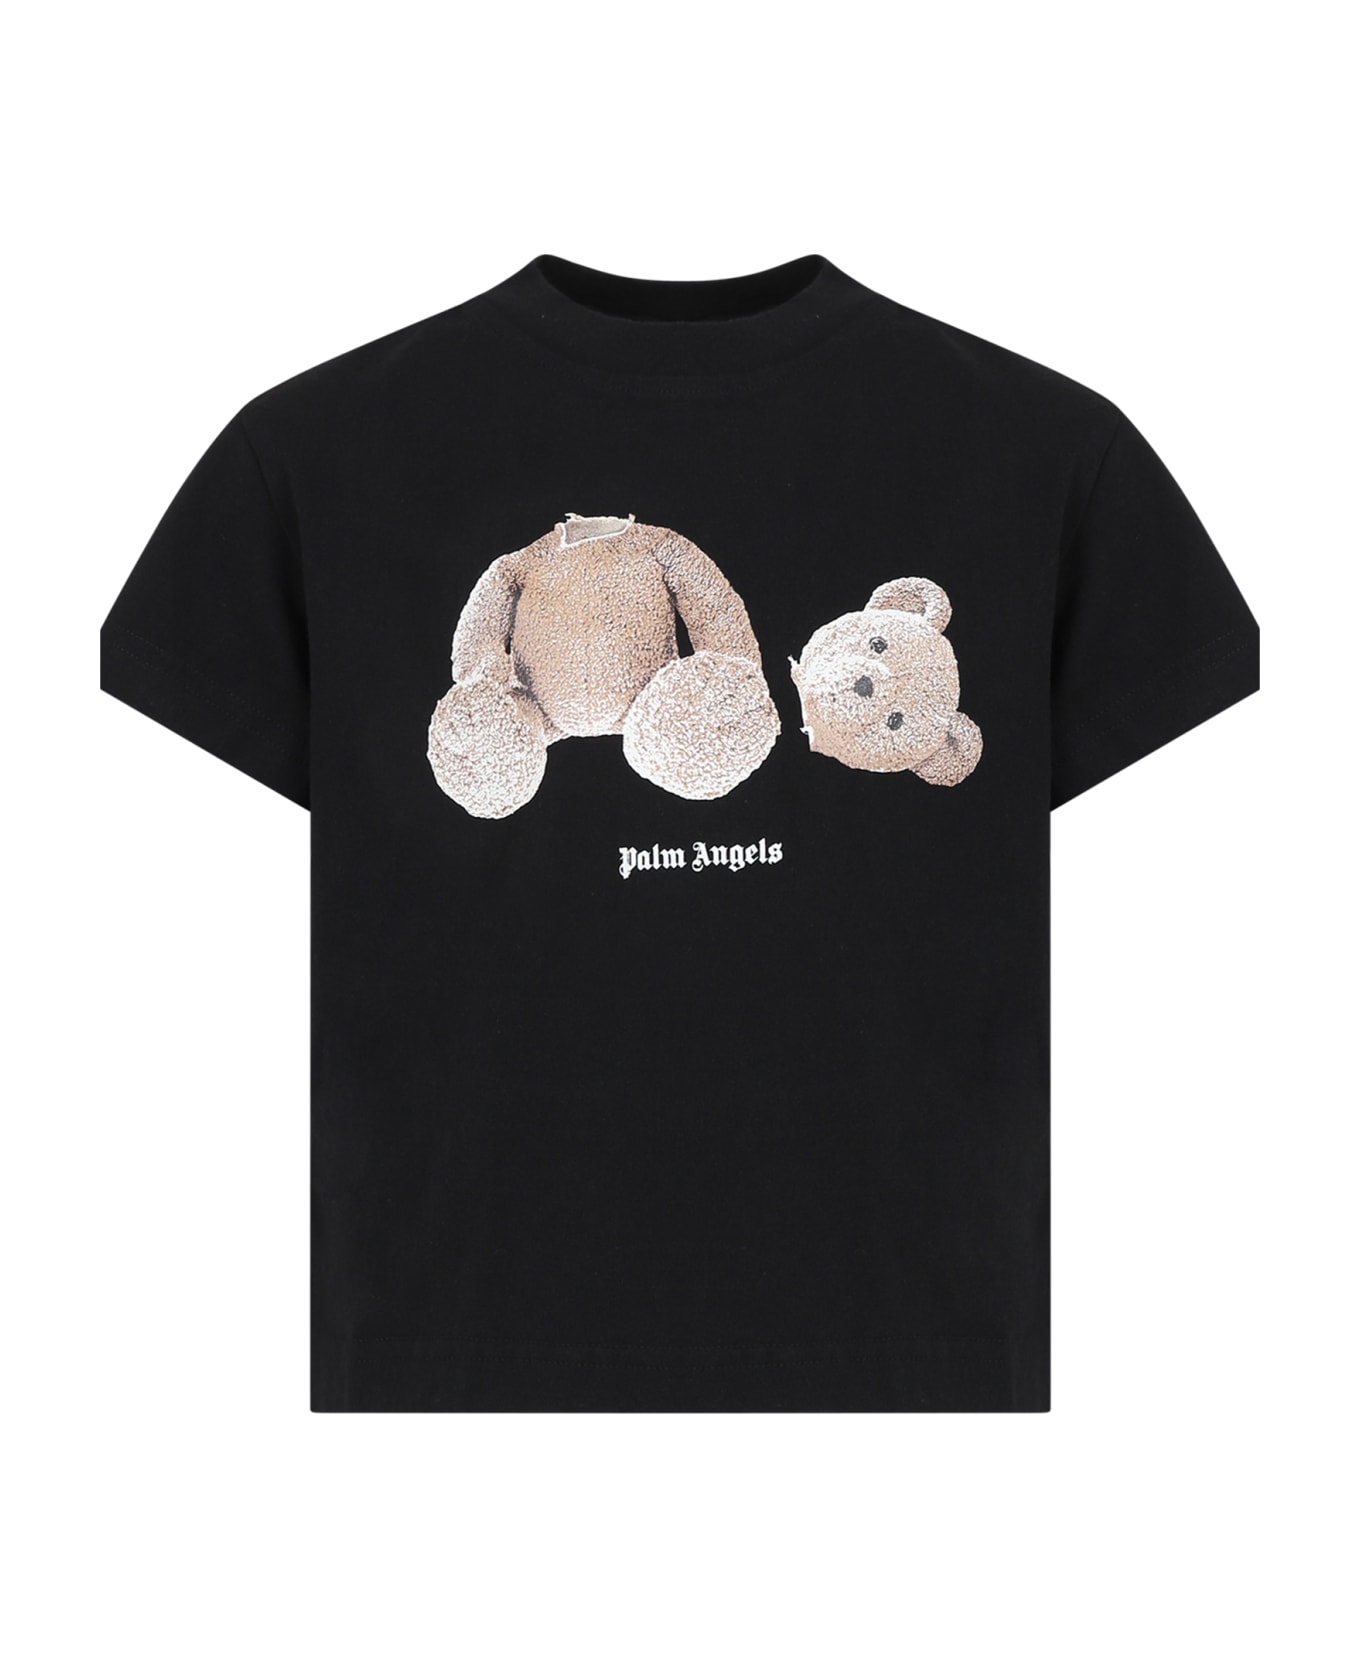 Palm Angels Black T-shirt For Kids With Bear - BLACK